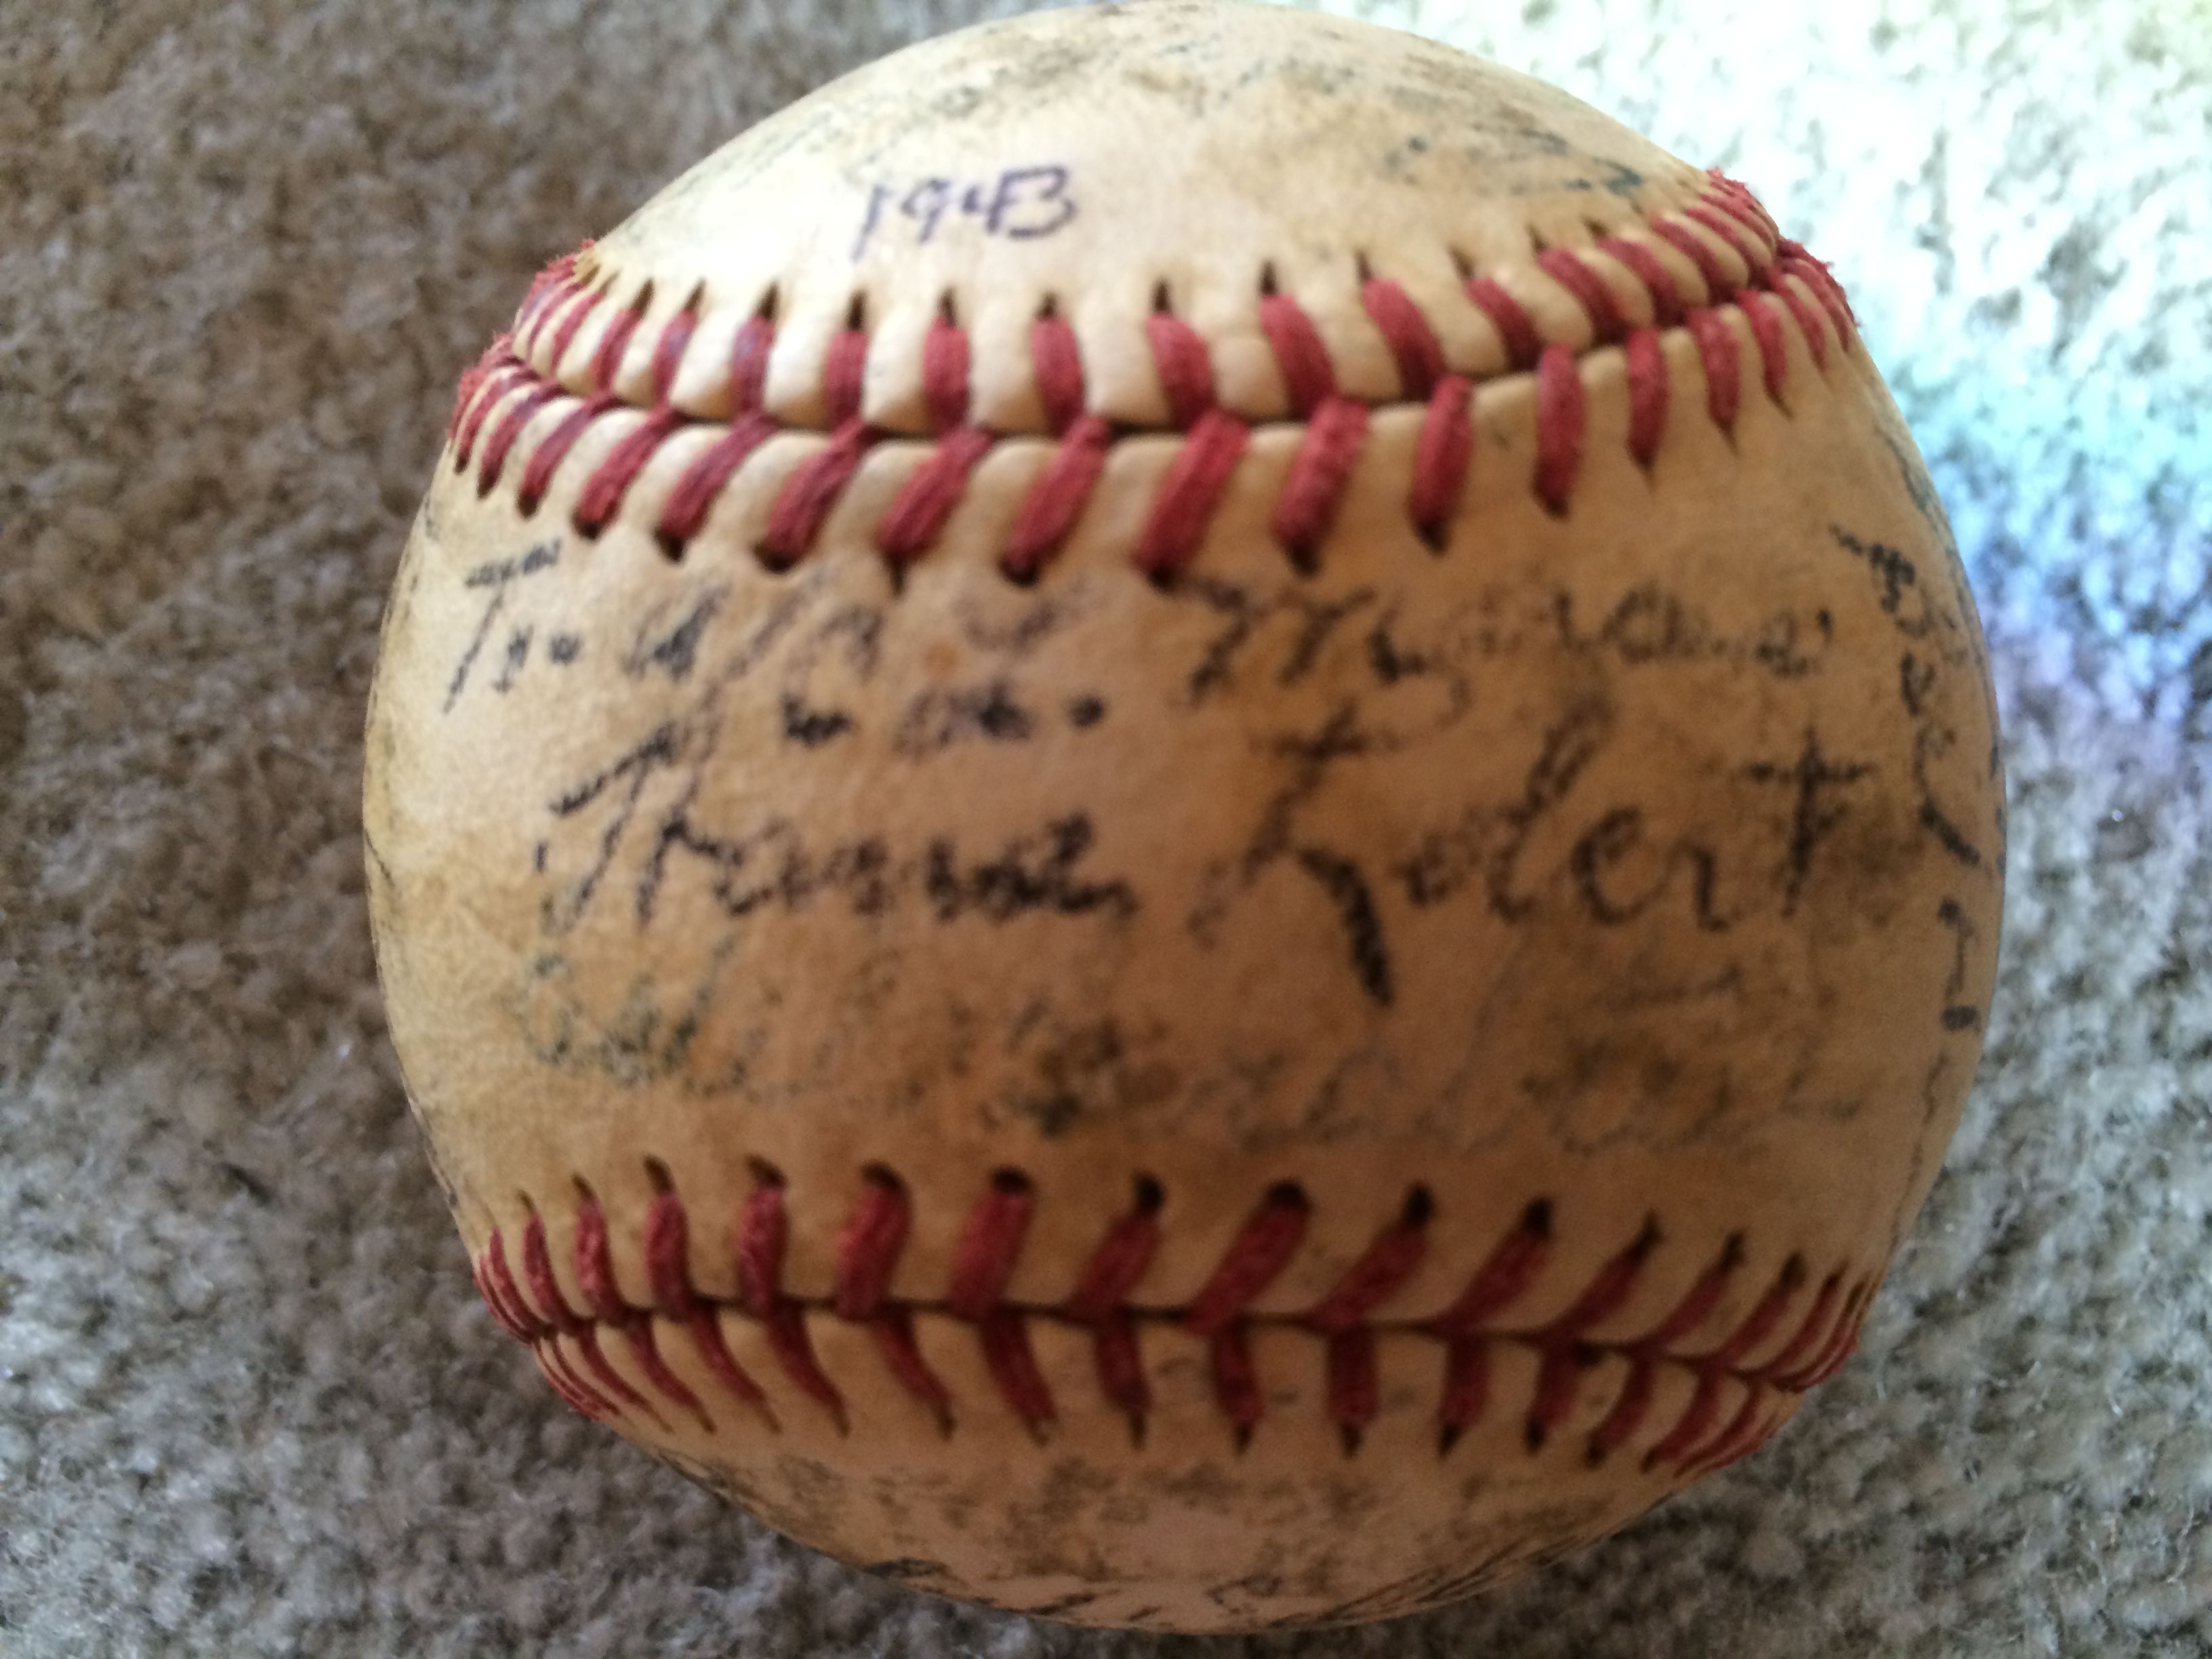 Lot Detail - 1943 REDS TEAM SIGNED BALL with BUCKY WALTERS